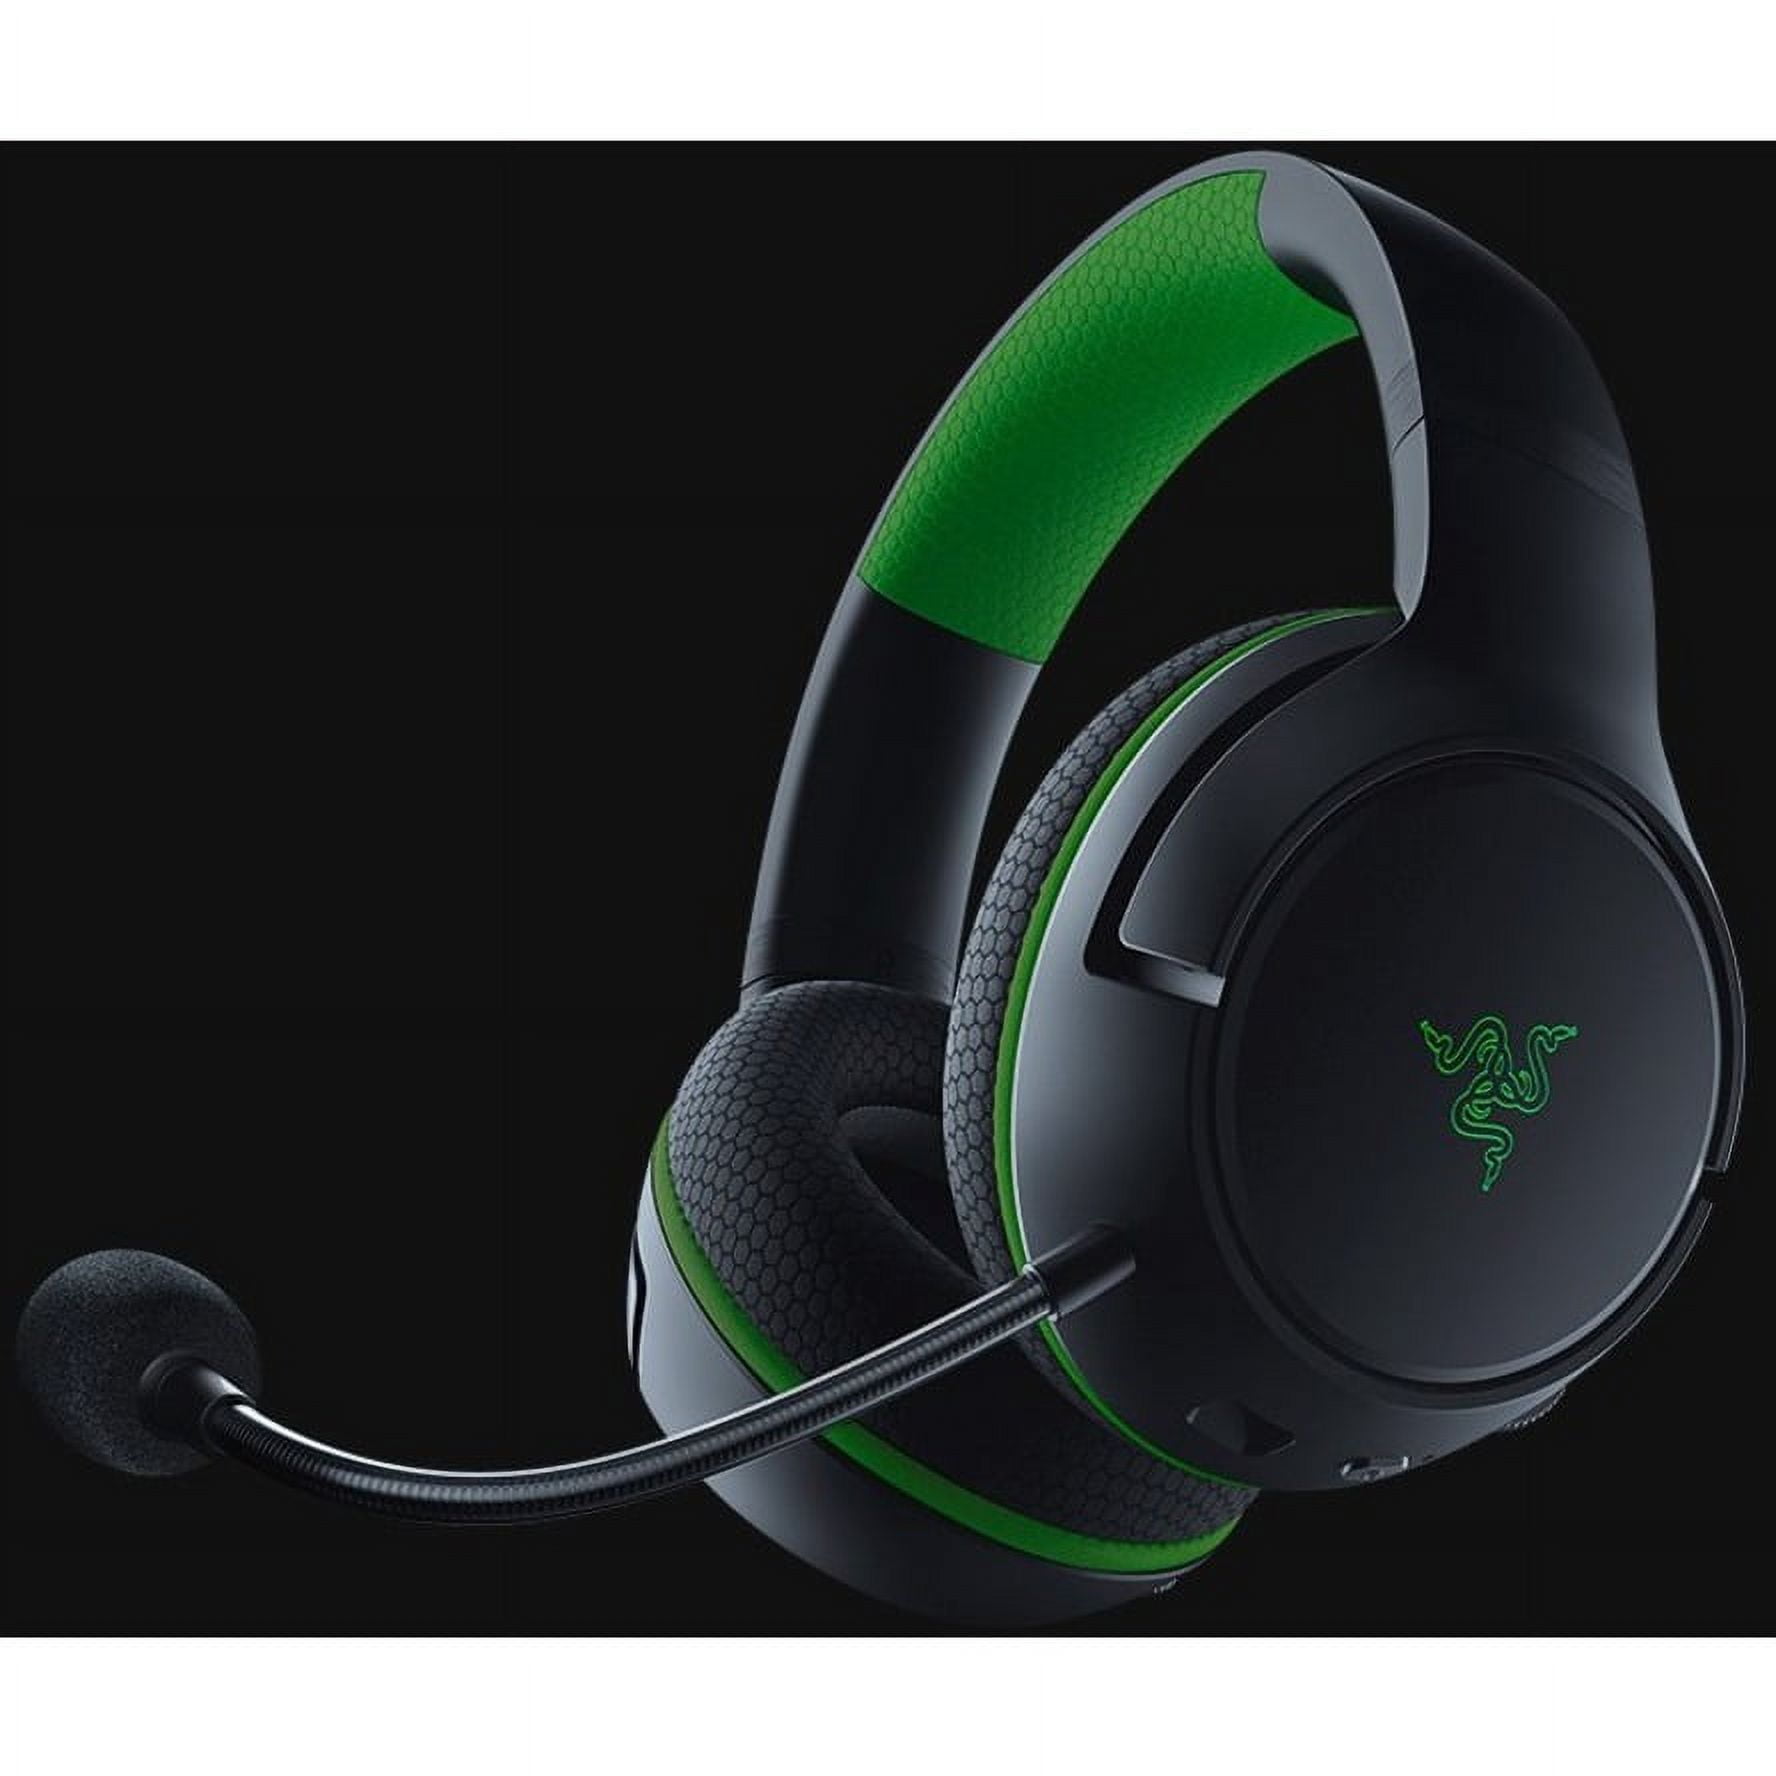  Razer Kaira Pro Wireless Gaming Headset for Xbox Series X  S:  TriForce Titanium 50mm Drivers - Supercardioid Mic Dedicated Mobile EQ and  Pairing Bluetooth 5.0 Black : Todo lo demás